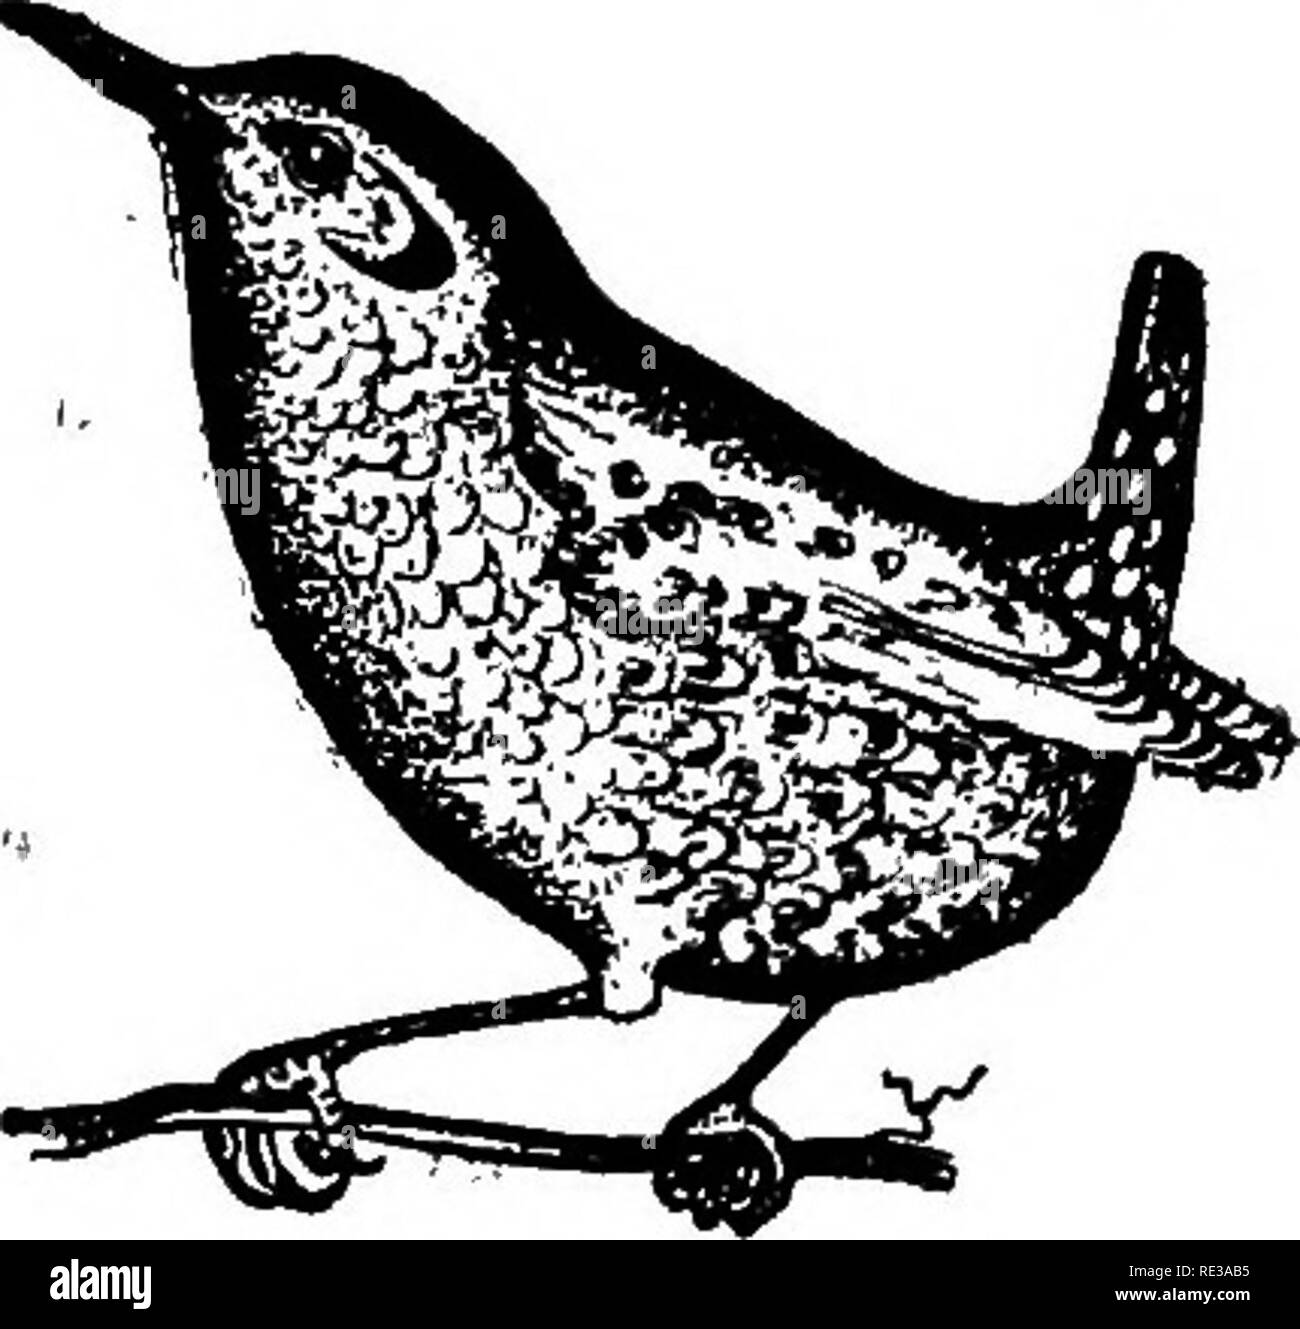 . Nests and eggs of North American birds. Birds; Birds. -NORTH AMERICAN BIRDS. 475. 7220. WESTERIT WINTER WREN. Troglodytes Jiiemalts pacifieus Baird. Geog. Dist.âPacific coast regioa from Sitka to Southern California; south, in winter to Western Mexico; east to Eastern Oregon, Nevada, etc. This subspecies breeds from the southern coast ranges of California- north to Sitka. Habits, nesting and eggs like those of T. hiemalis of the East. Eggs .60x.48. 723. ALASKAN WREN. Troglodytes alascensis Baird. Geog. Dist.âAleutian, and Pribilof Islands, Alaska. &quot;In a small collection of birds' skins, Stock Photo